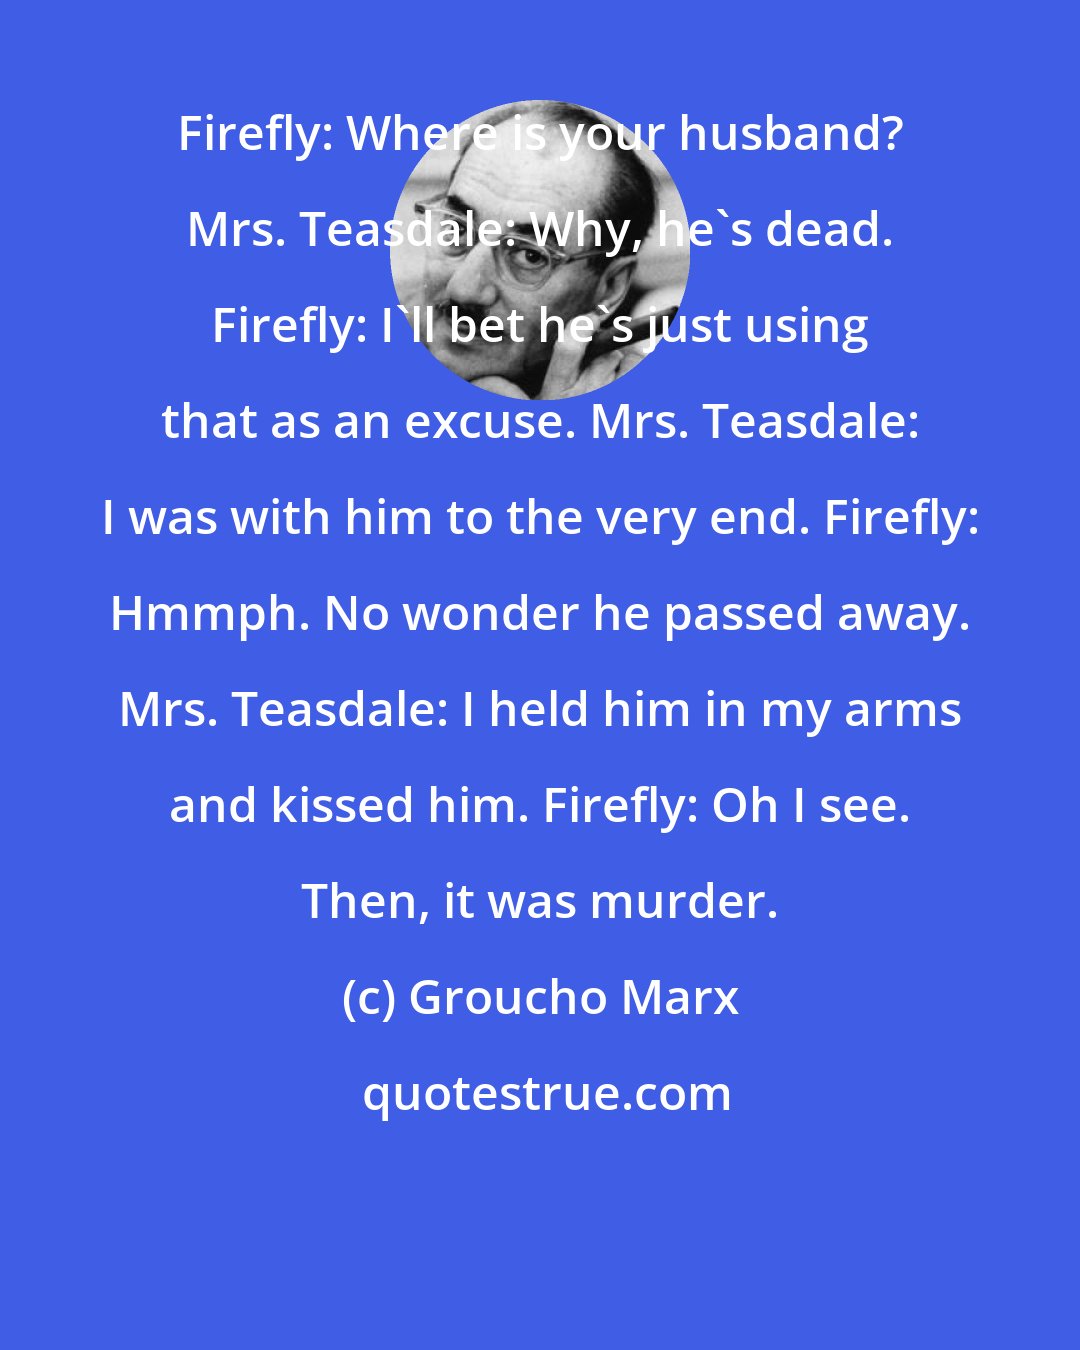 Groucho Marx: Firefly: Where is your husband? Mrs. Teasdale: Why, he's dead. Firefly: I'll bet he's just using that as an excuse. Mrs. Teasdale: I was with him to the very end. Firefly: Hmmph. No wonder he passed away. Mrs. Teasdale: I held him in my arms and kissed him. Firefly: Oh I see. Then, it was murder.